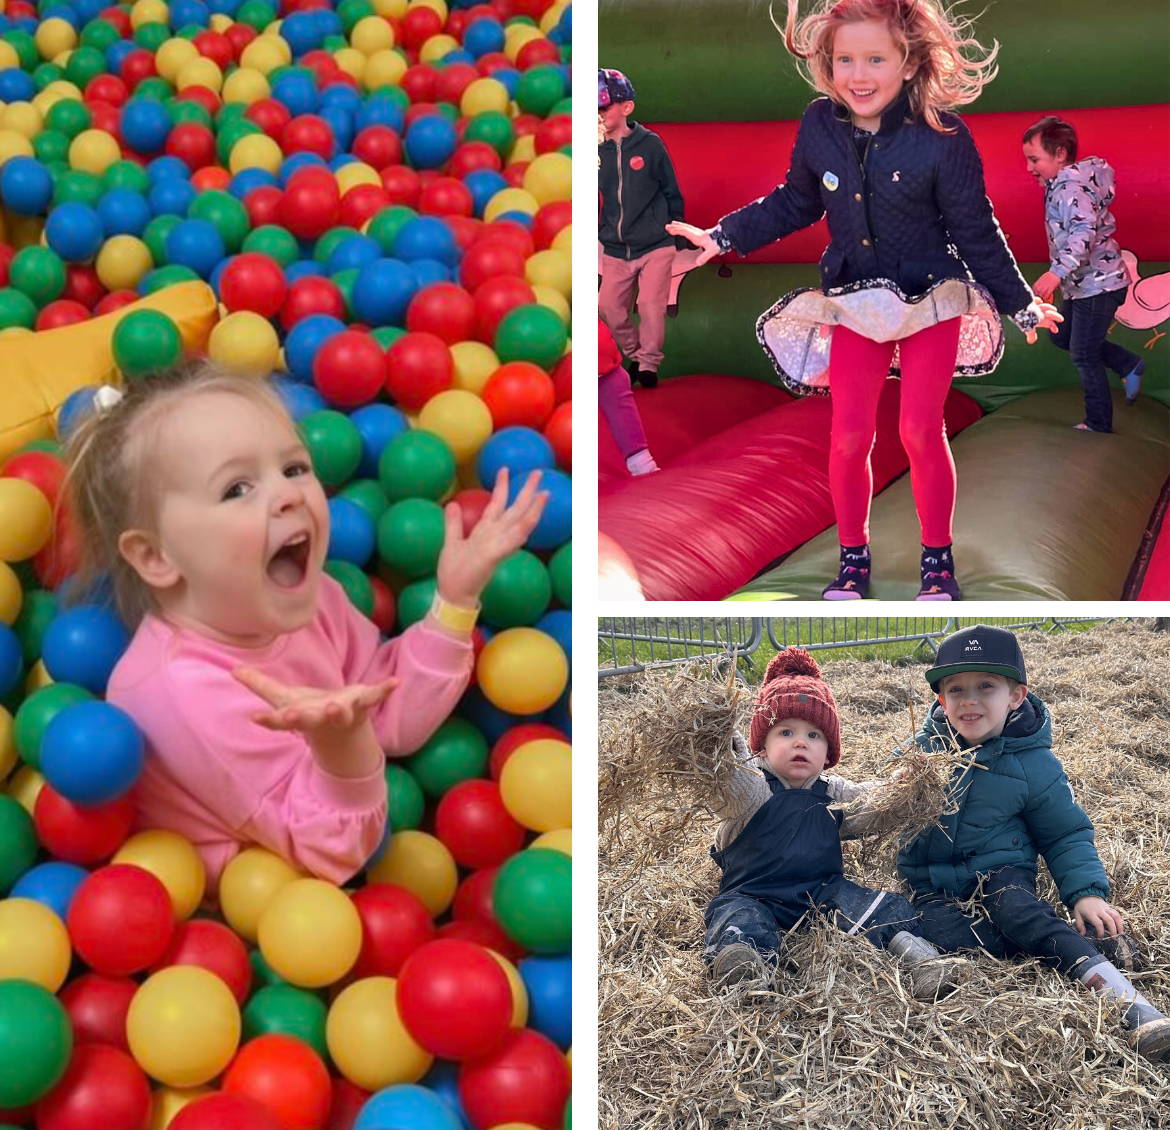 Young girl playing in a colourful ball pit wearing a pink jumper and a young girl jumping on a bouncy castle smiling having fun